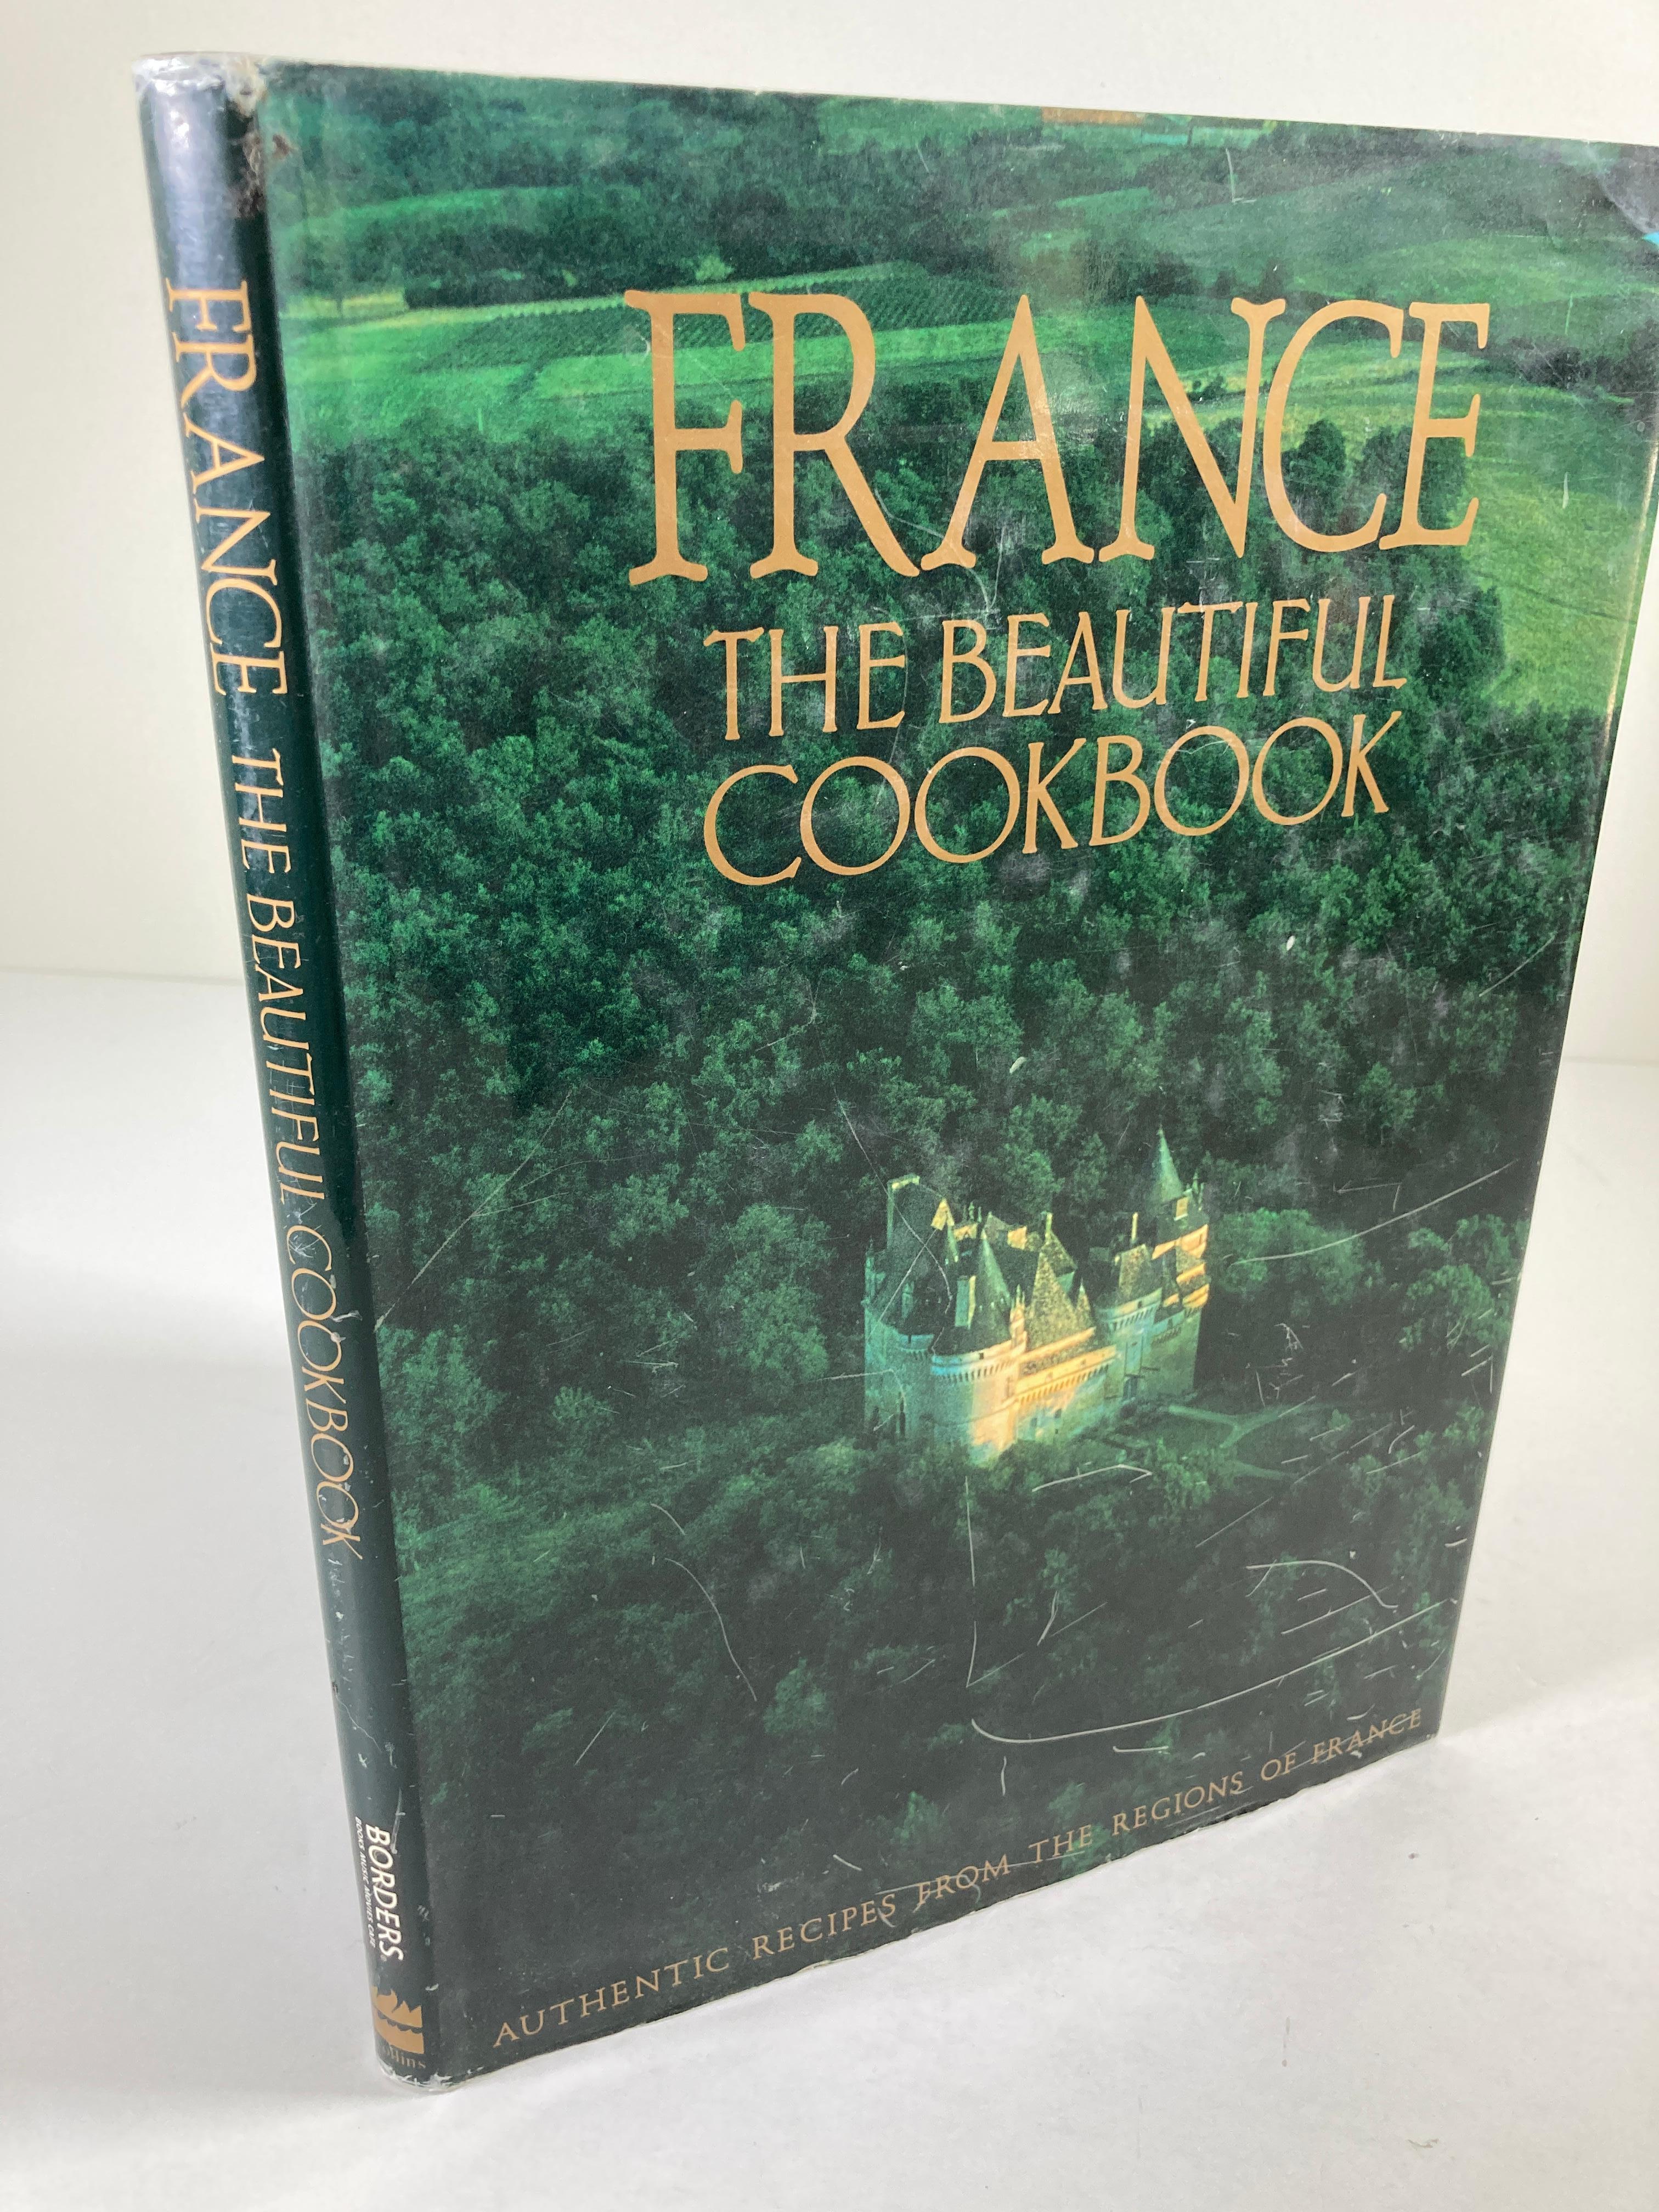 Vintage 1999 book - France~ The Beautiful Cookbook ~ by the Scotto Sisters - French Recipes.
A bounty of more than 240 recipes from the regions of France reveal the rich and varied produce of the world'srenowned center of gastronomy. France the